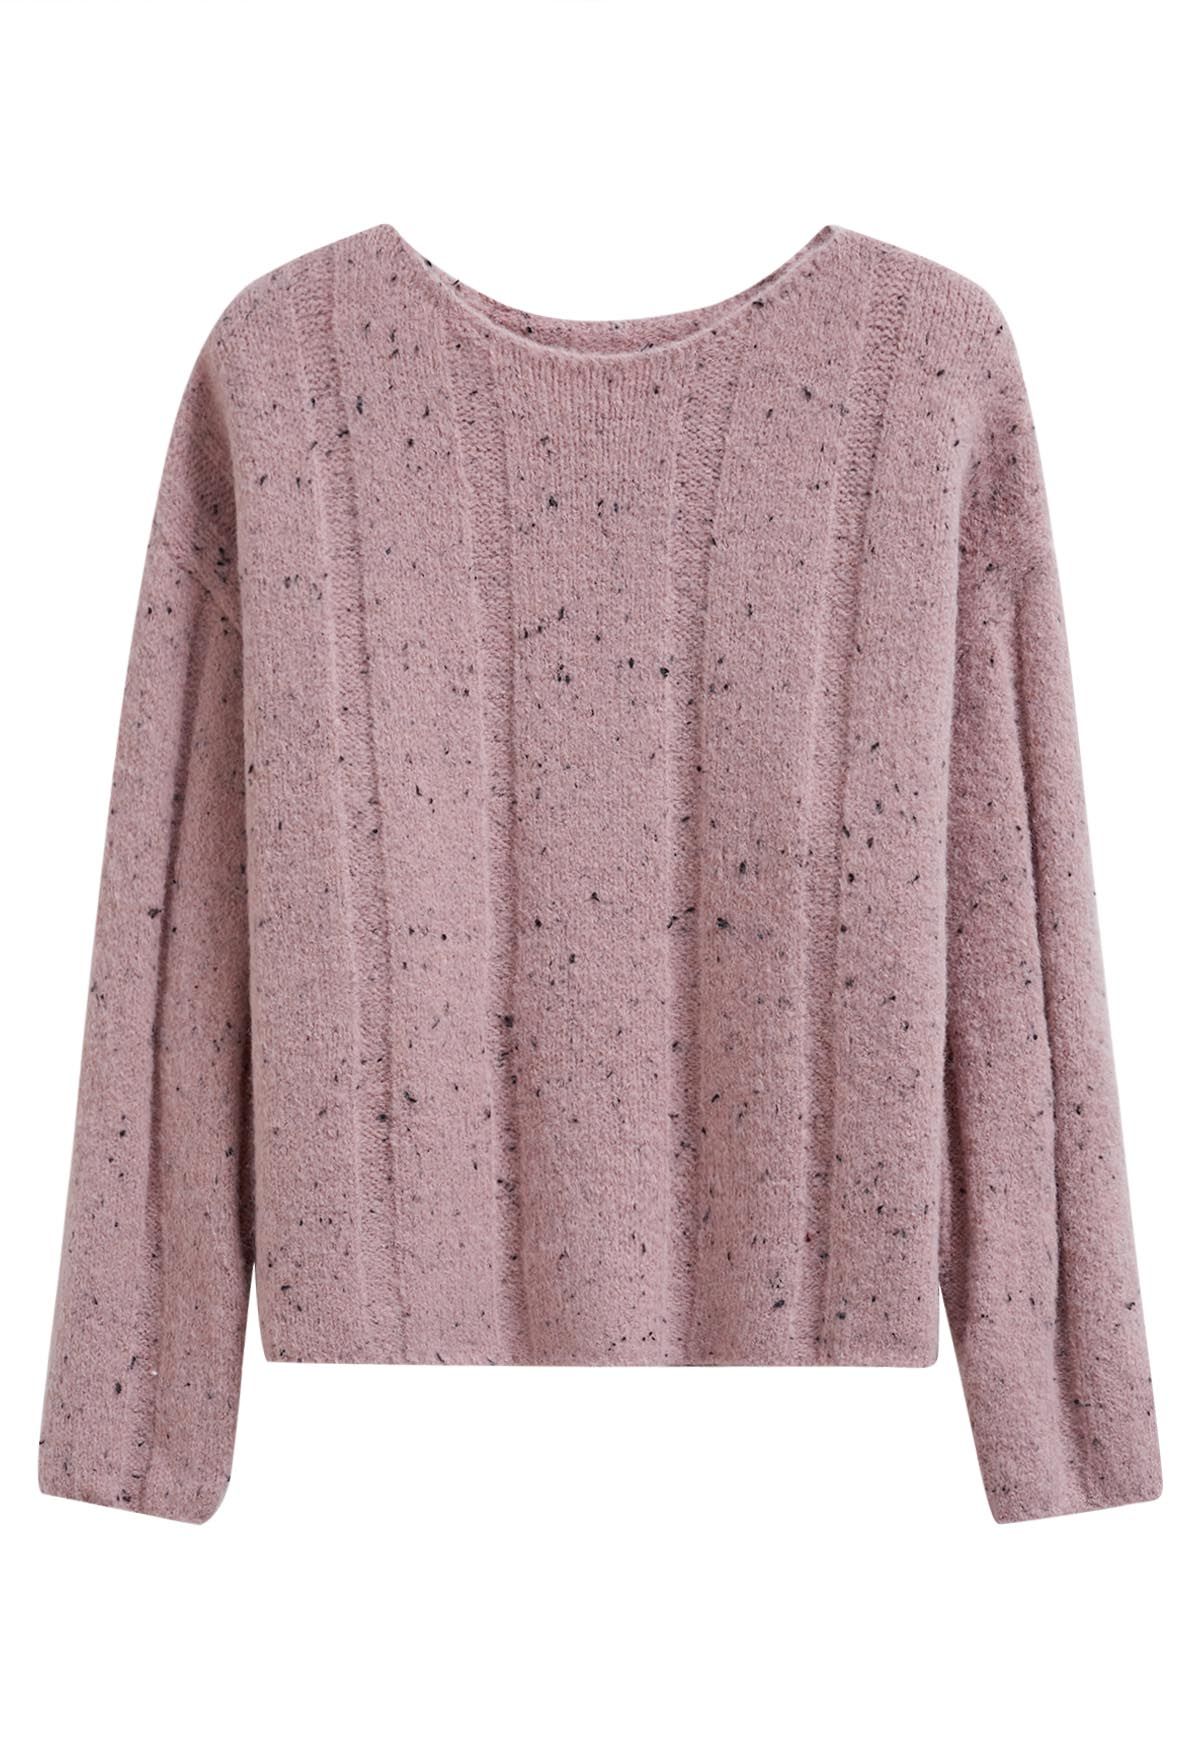 Cozy Drop Shoulder Mixed Knit Sweater in Pink